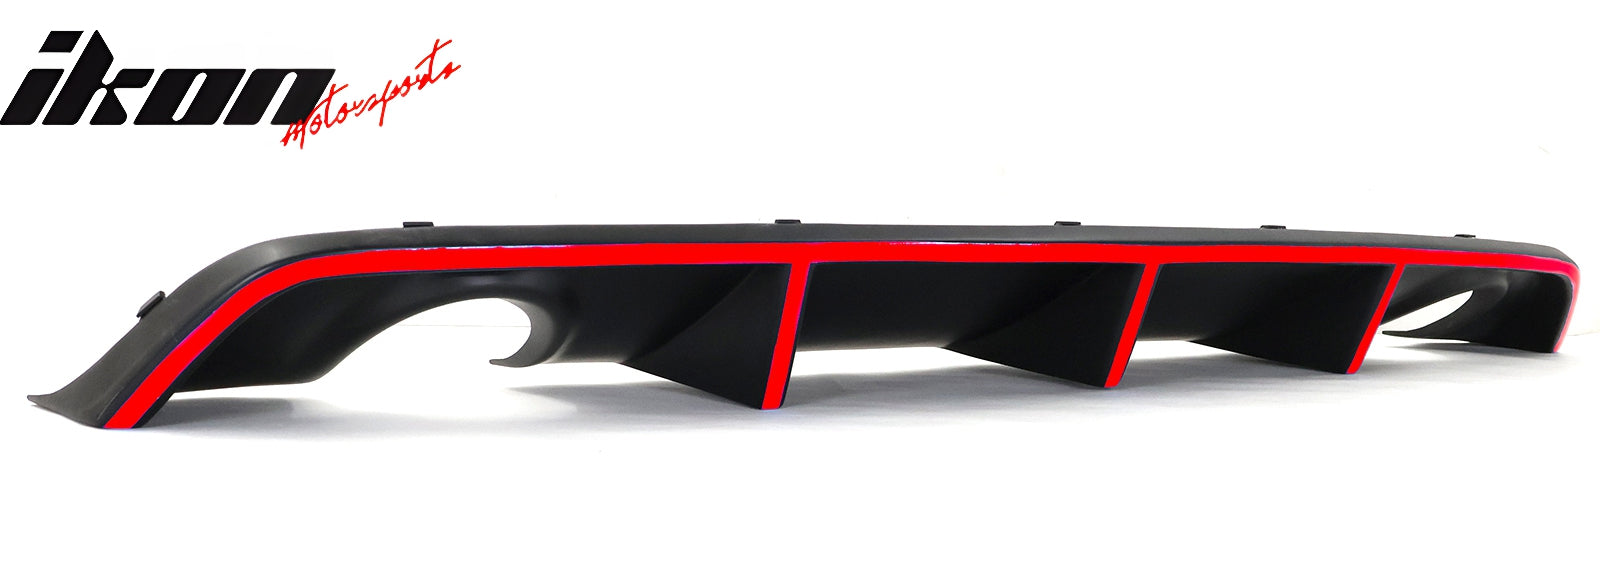 Fits 12-14 Dodge Charger SRT8 OE Style Rear Lip Diffuser w/ Red Reflective Tape